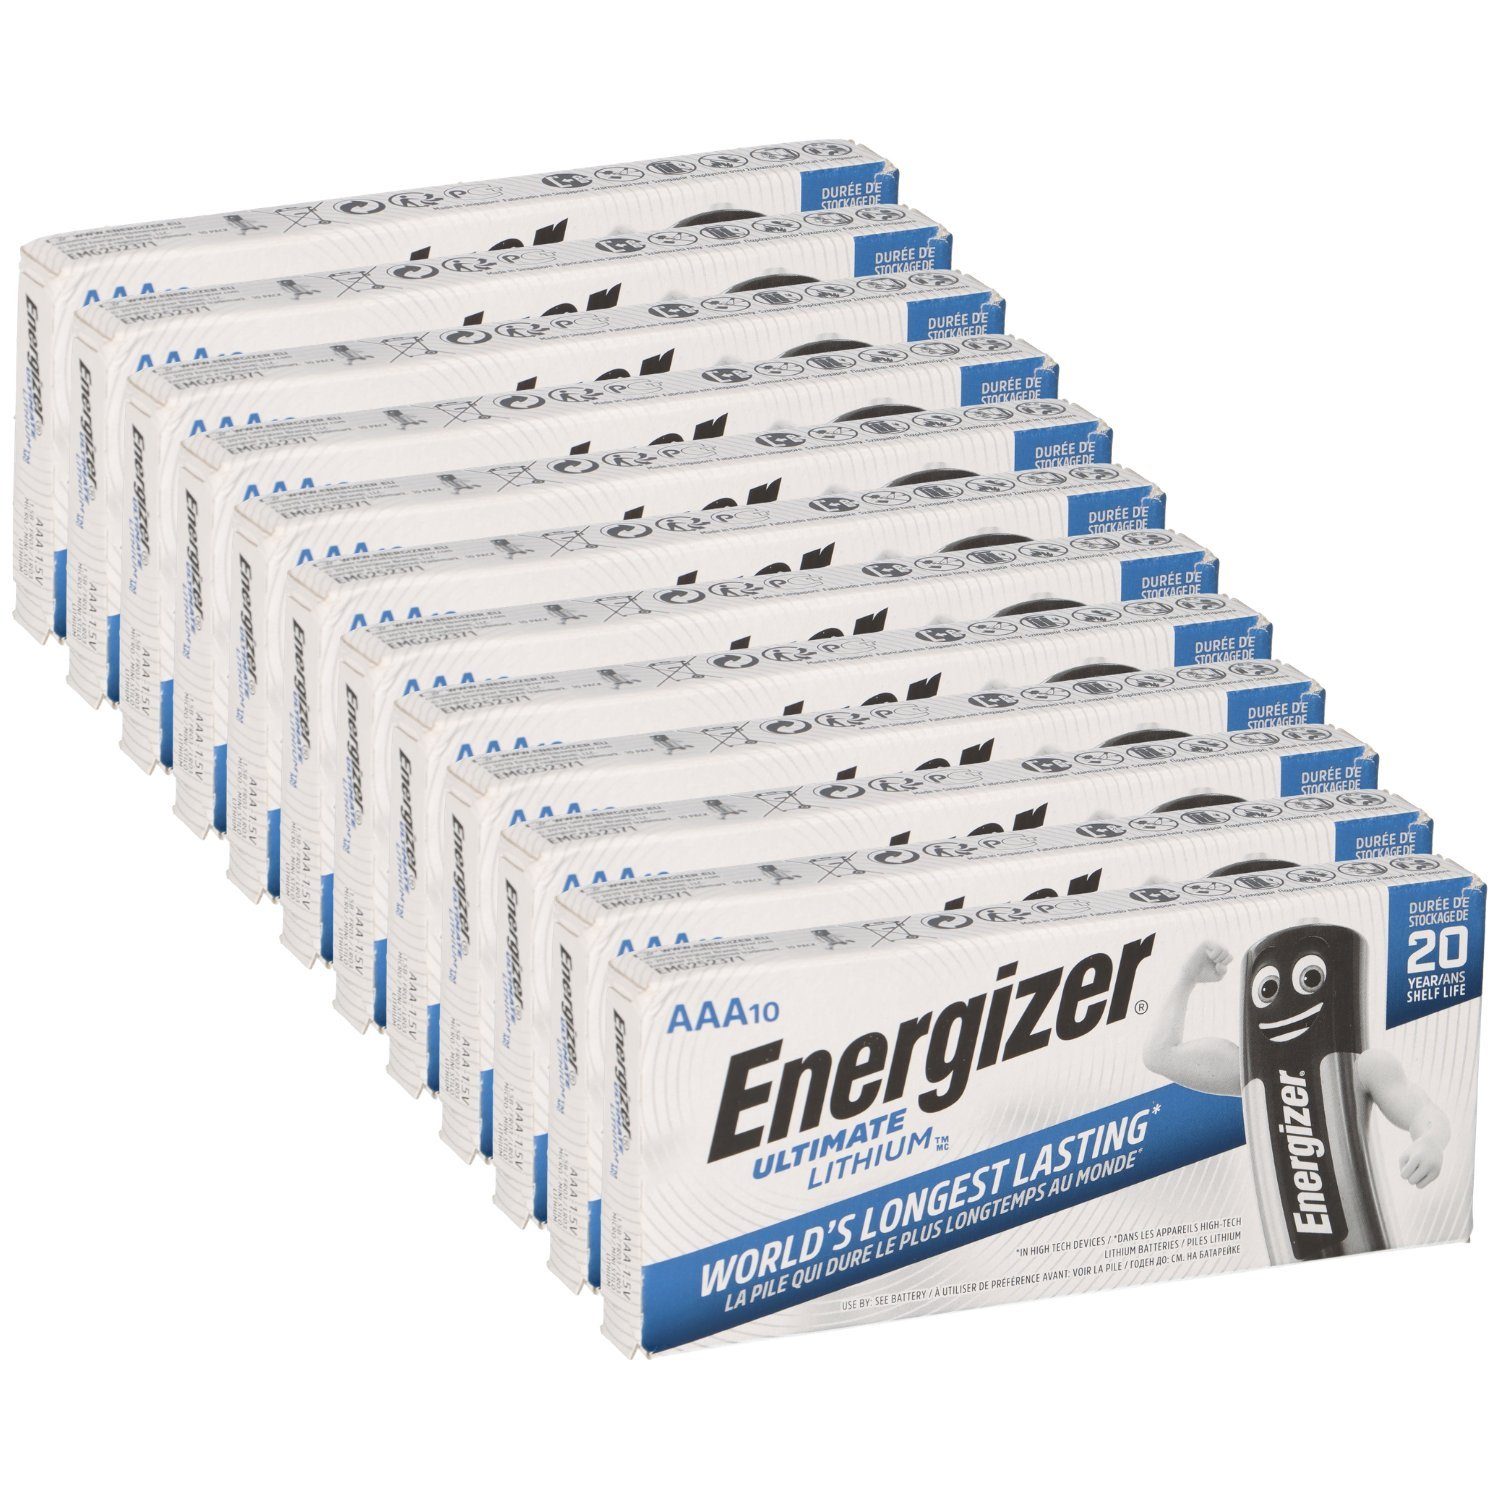 LR03 Energizer Micro Energizer Batterie 120x Batterie L92 Ultimate 1.5V Lithium AAA